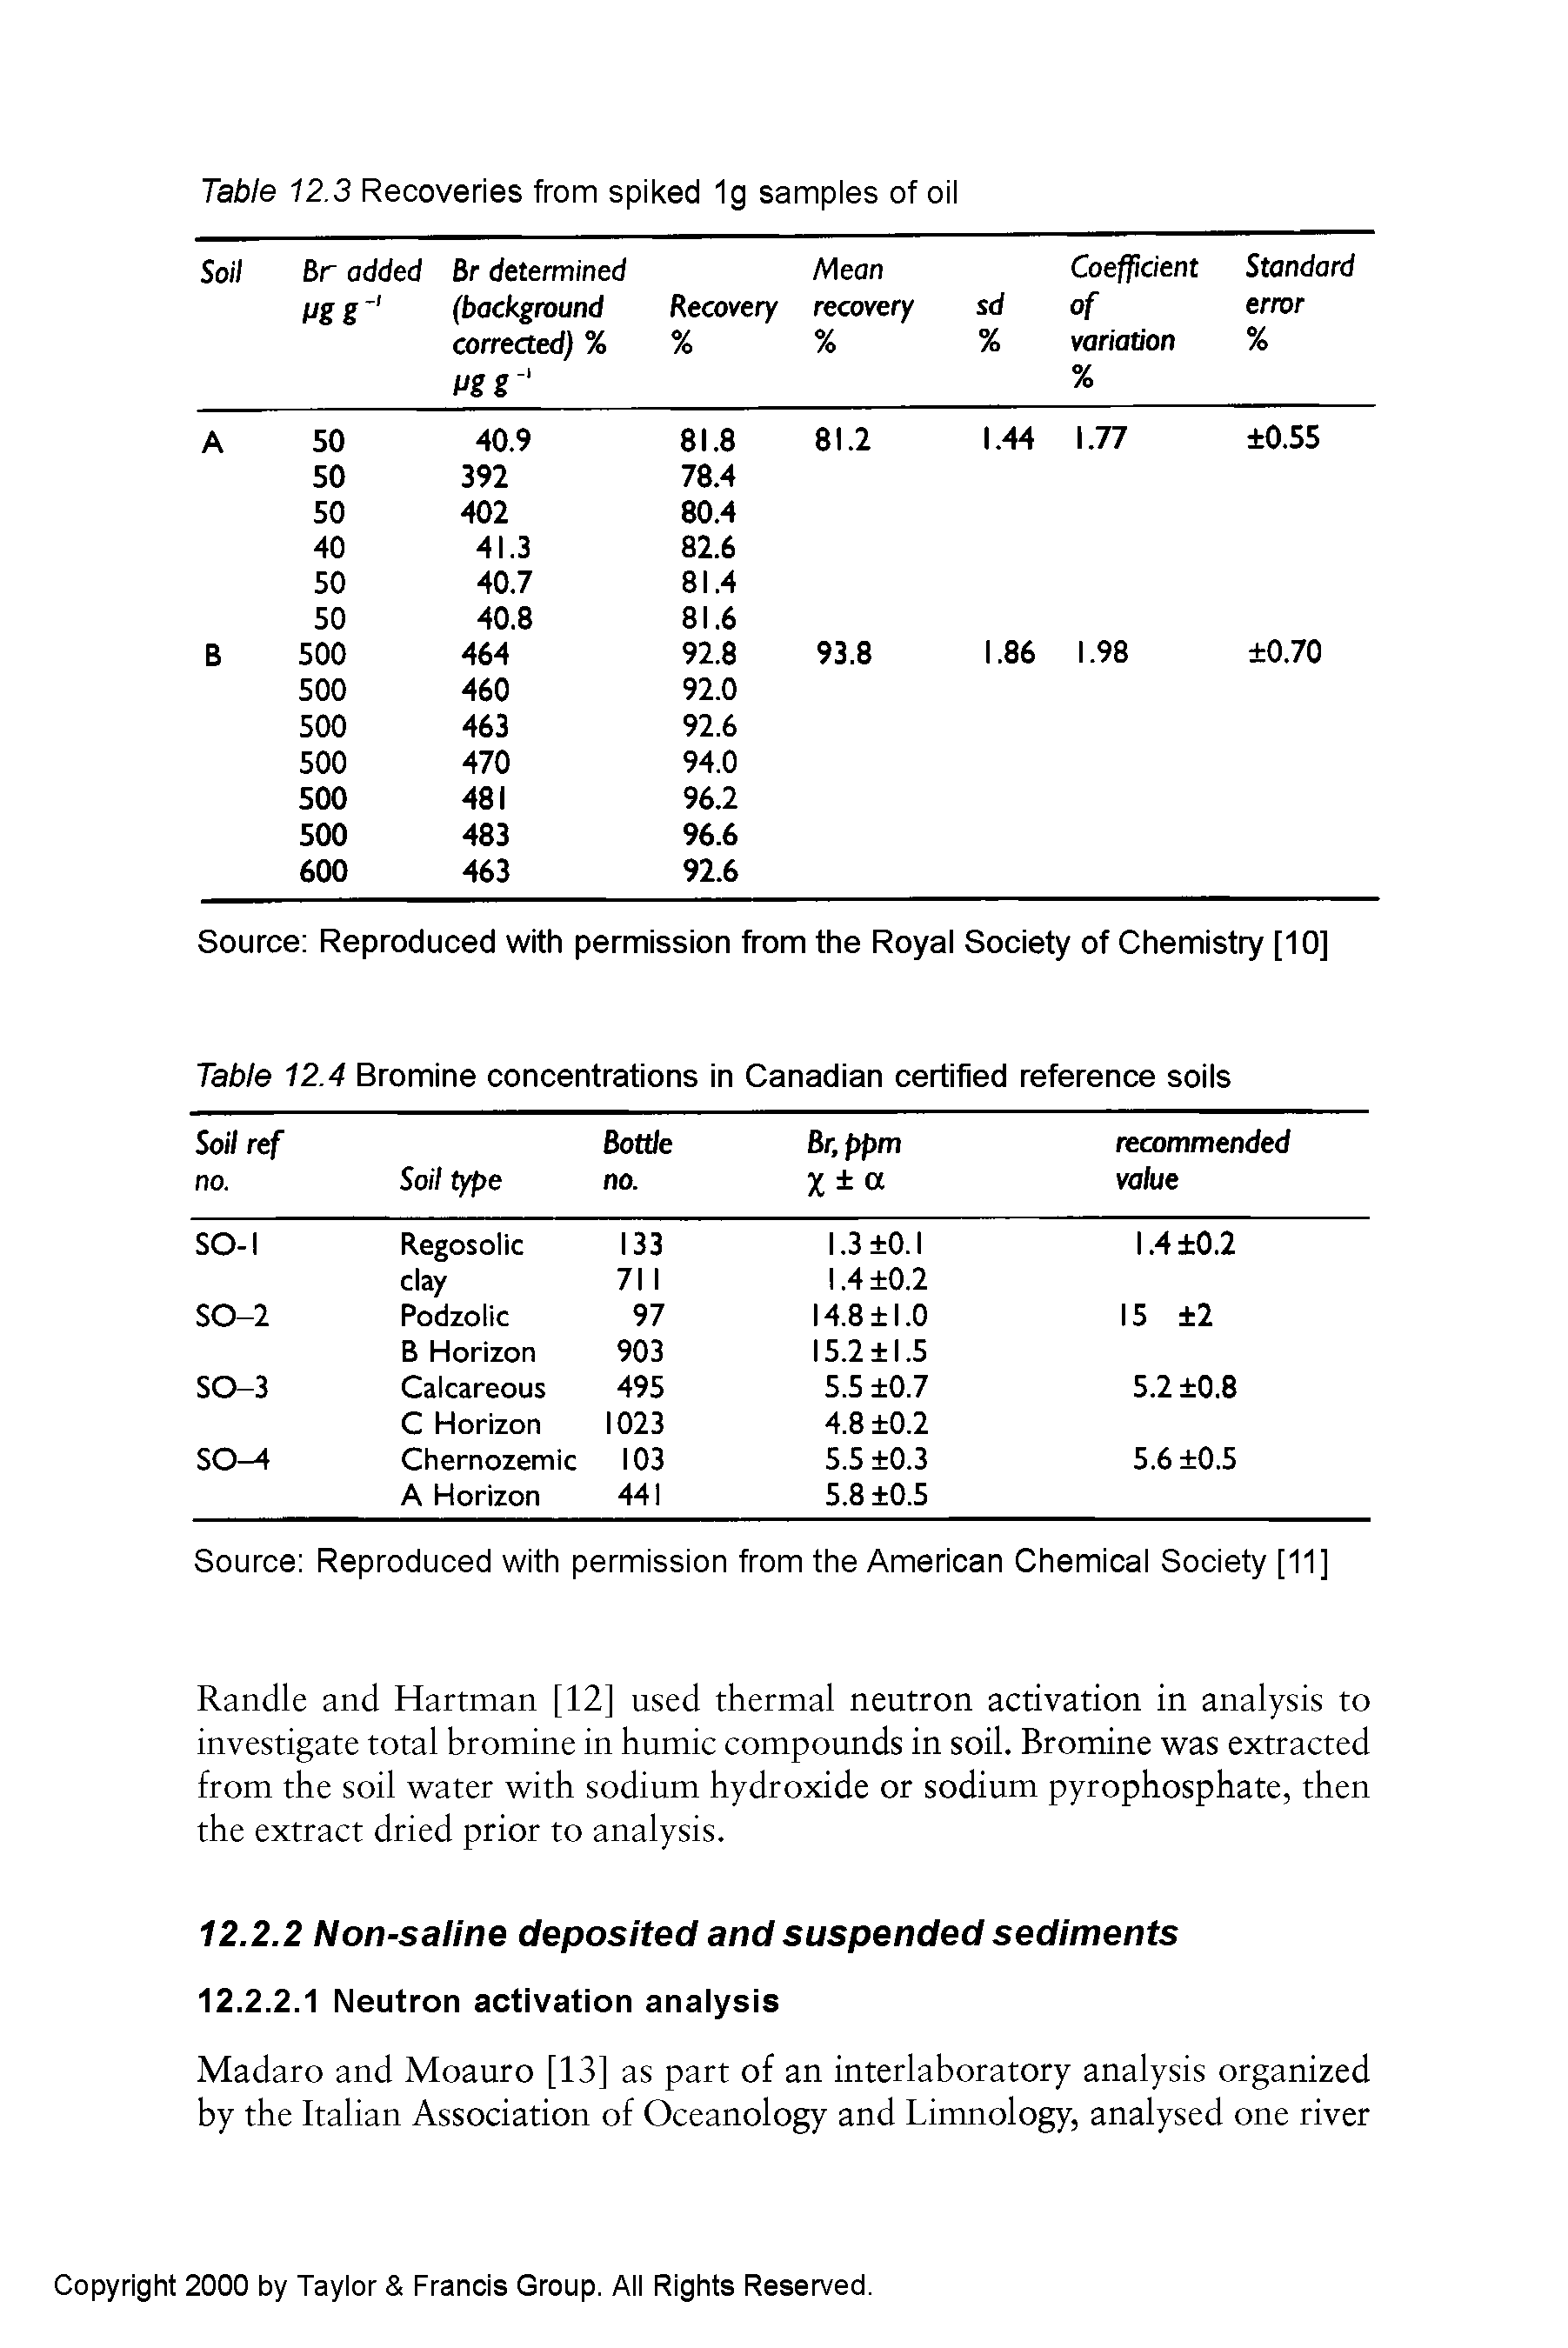 Table 12.4 Bromine concentrations in Canadian certified reference soils...